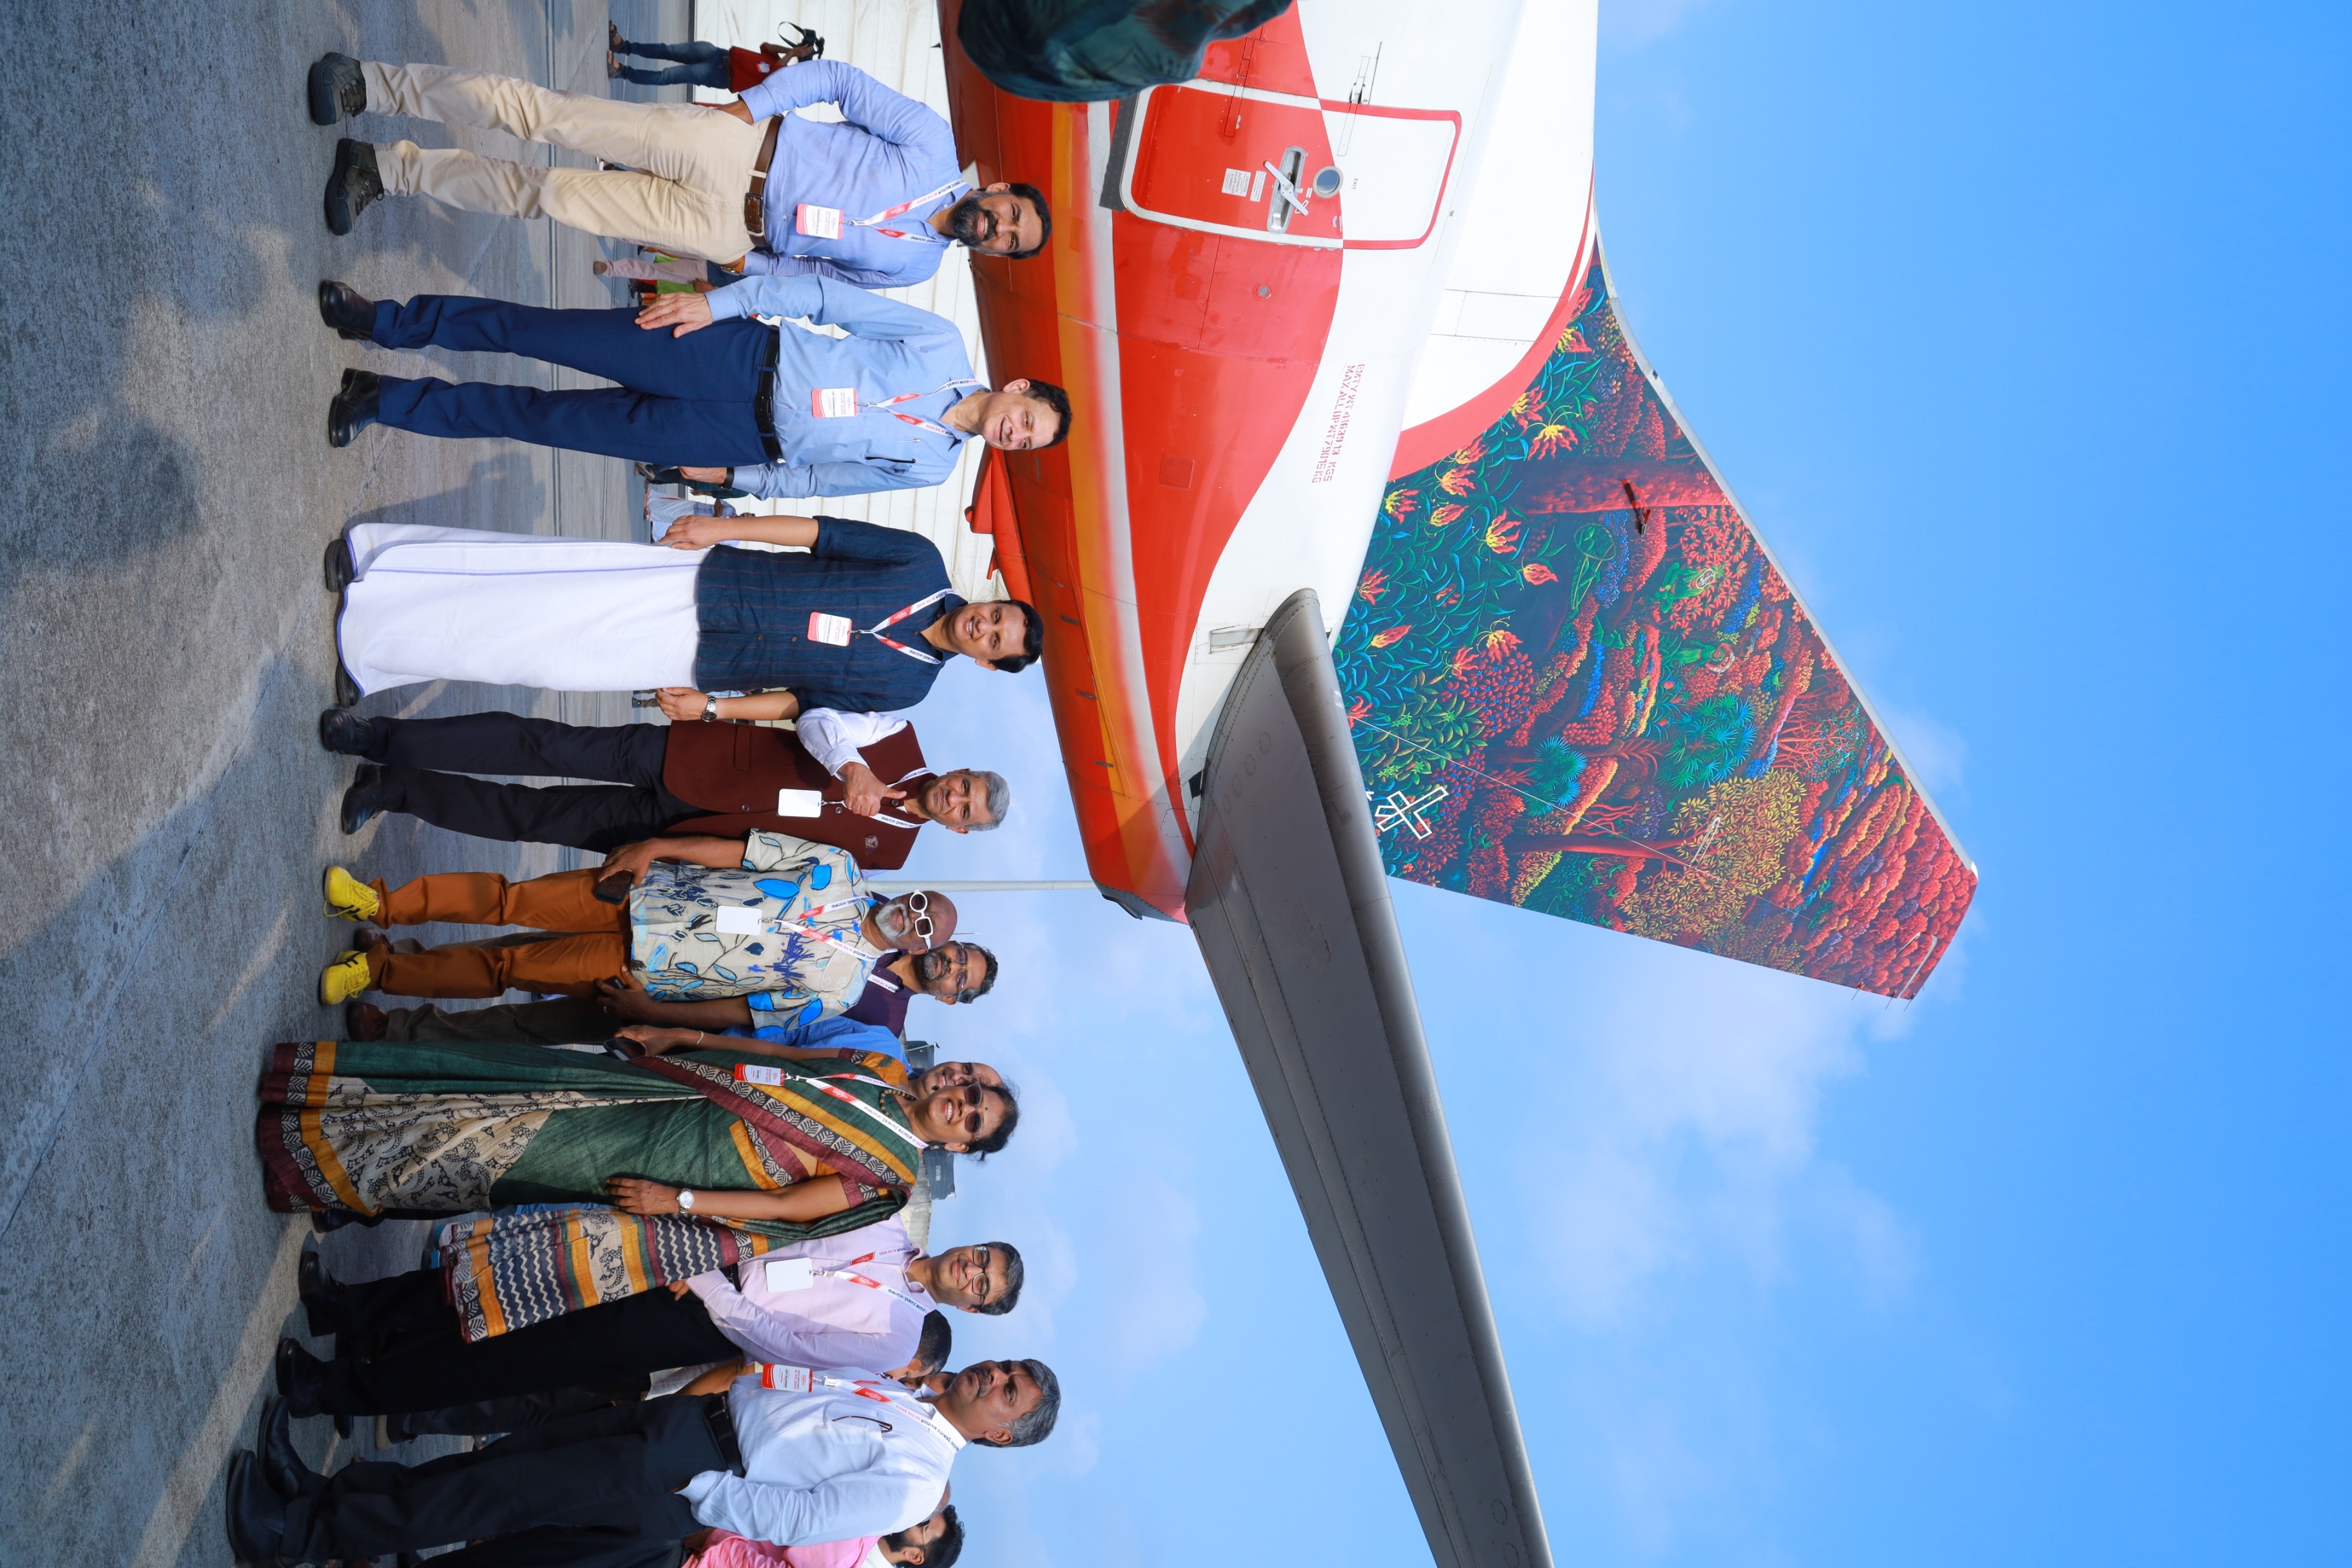 Kochi-Muziris Biennale touches the Skies with Air India Express New tail art unveiled